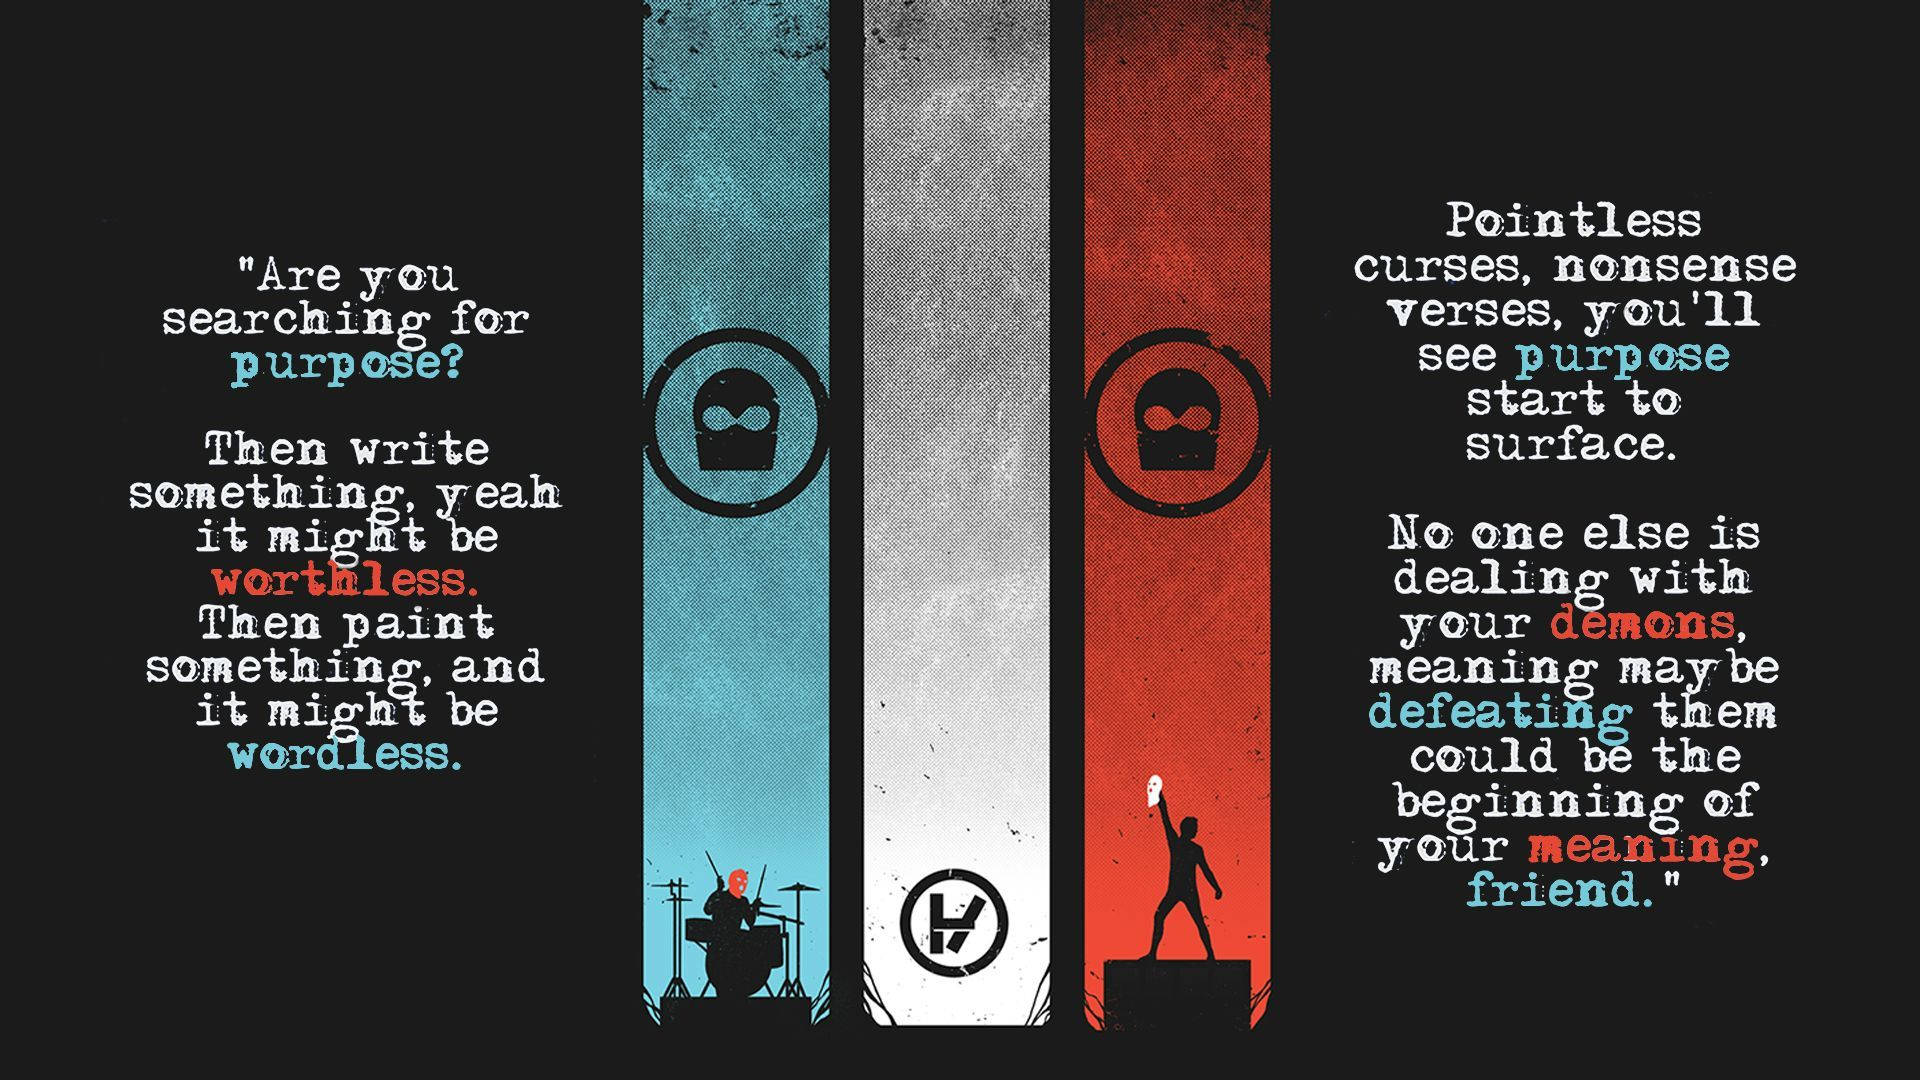 Twenty-One Pilots, showing their creative and unique style Wallpaper